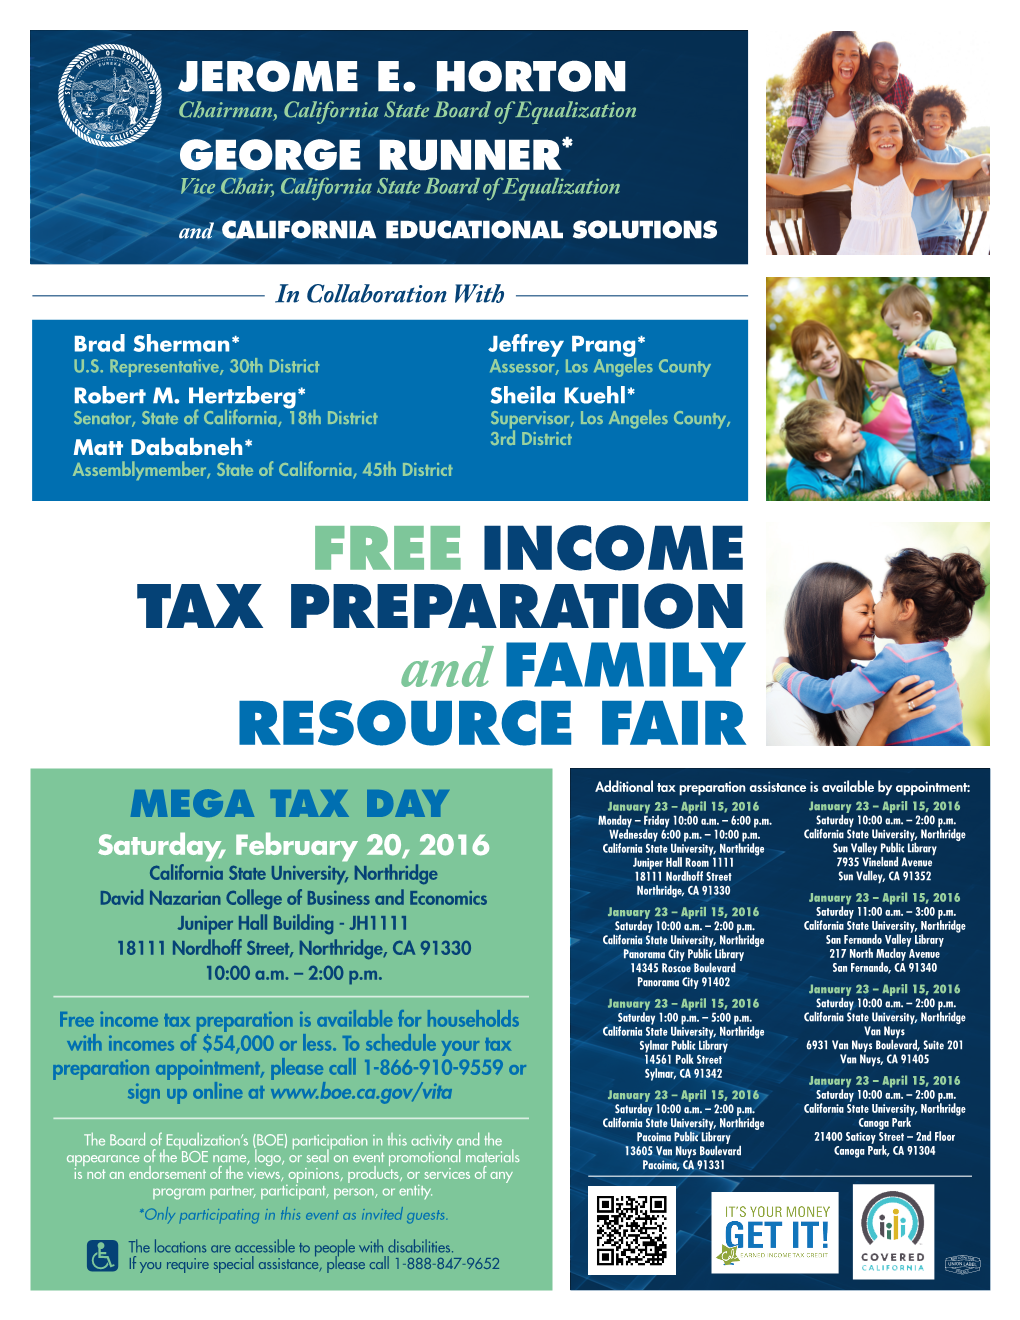 FREE INCOME TAX PREPARATION and FAMILY RESOURCE FAIR